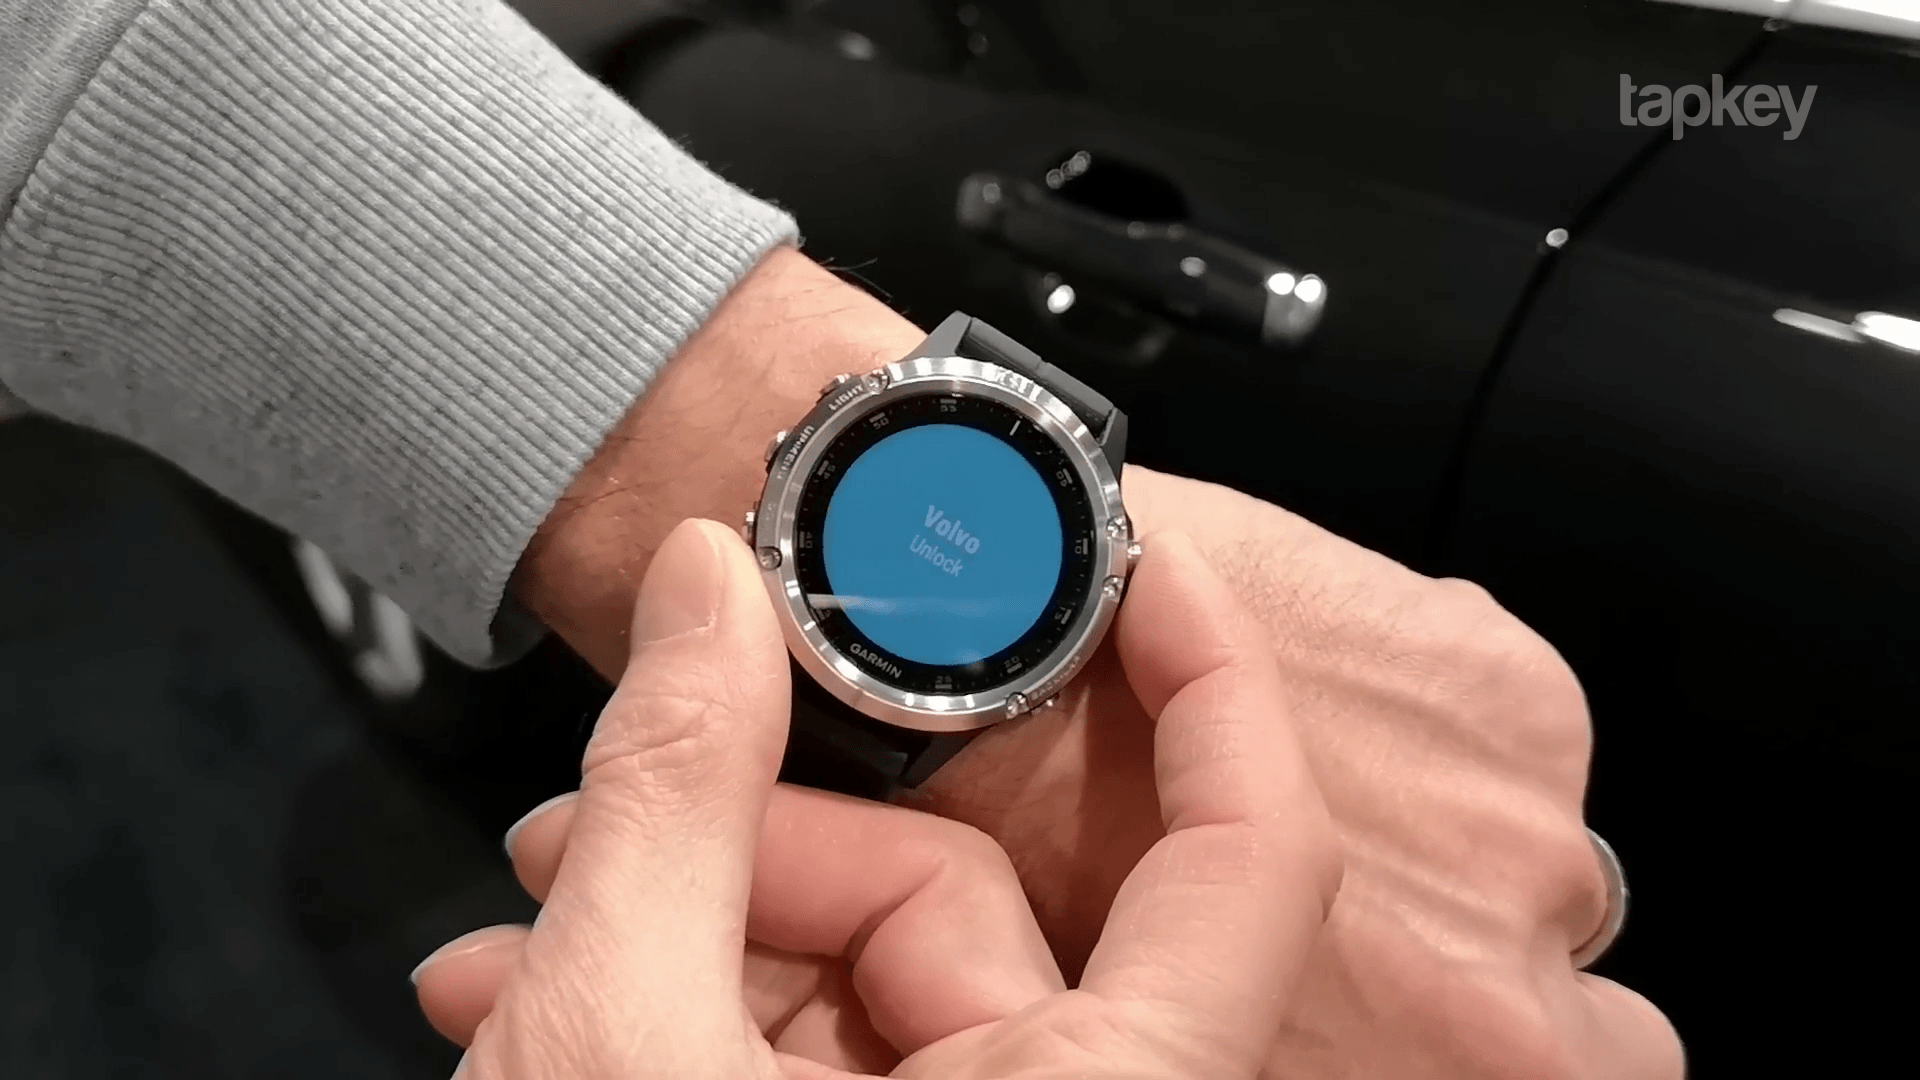 Garmin and unlock your car with your watch | NextPit